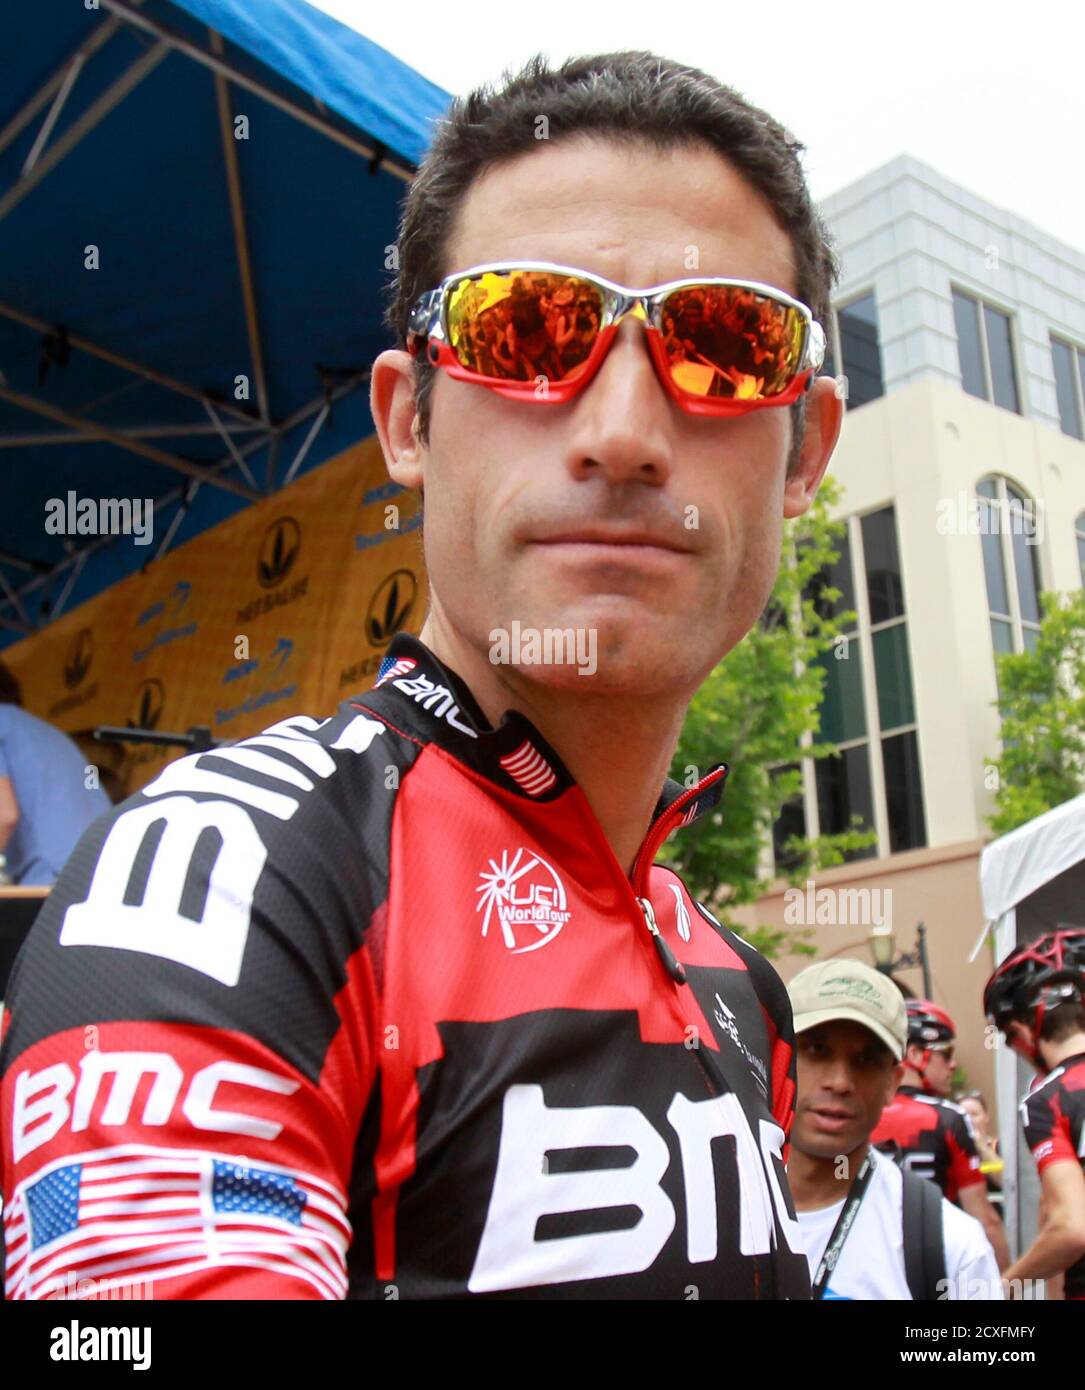 George Hincapie is seen as he signs autographs before the  Stage-8  of the Amgen Tour of California from Santa Clarita to Thousand Oaks,  California, May 22, 2011. REUTERS/Lucy Nicholson (UNITED STATESSPORT